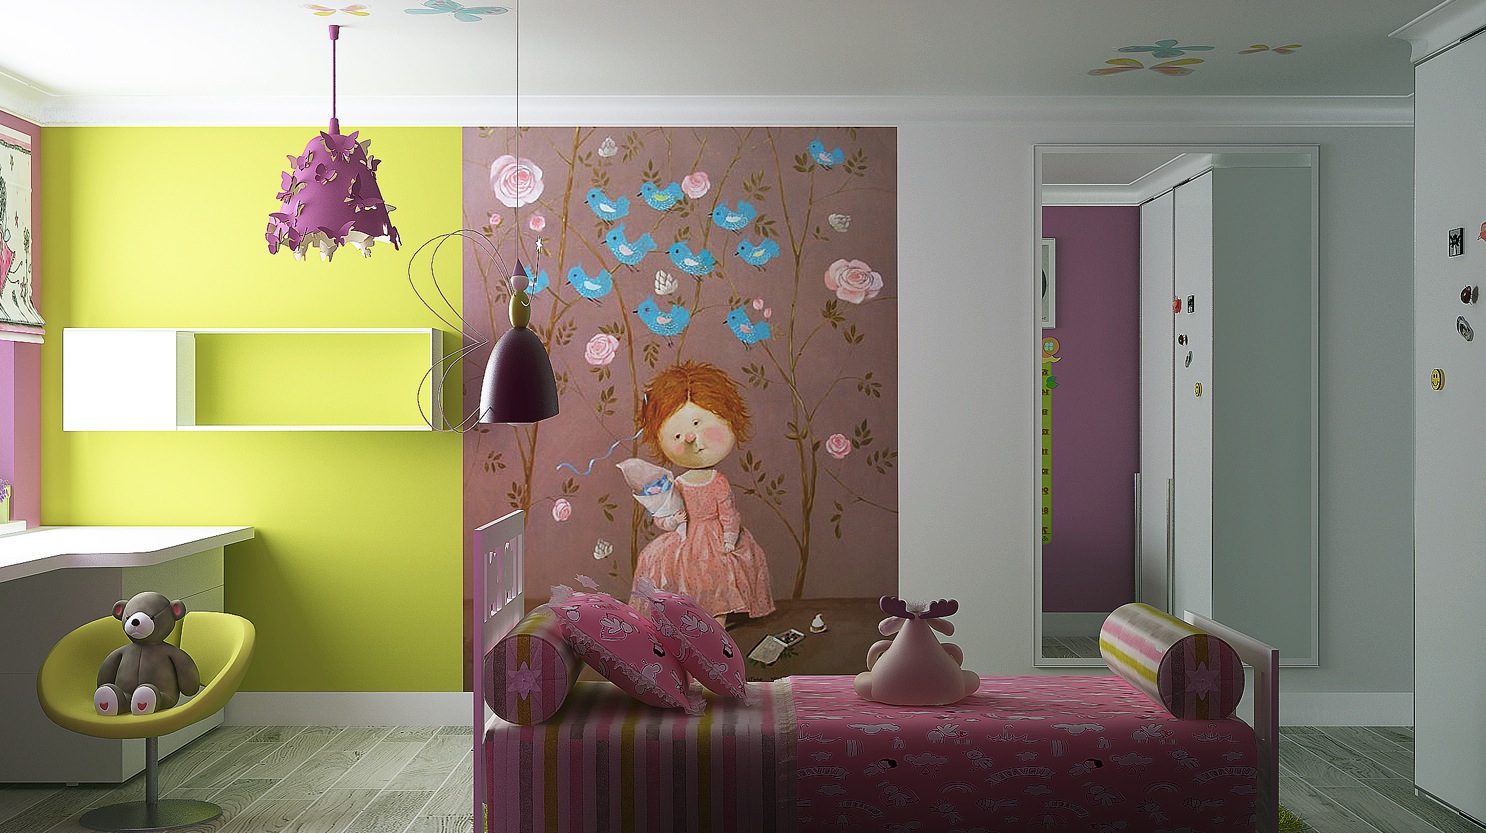 Wall decoration for girls' room "width =" 1486 "height =" 833 "srcset =" https://mileray.com/wp-content/uploads/2020/05/1588509576_758_Girls-Room-Designs-With-Creative-Ideas-and-Soft-Color-Decor.jpg 1486w, https: // myfashionos. com / wp-content / uploads / 2016/09 / Kate-Chelyustnikova-1-300x168.jpg 300w, https://mileray.com/wp-content/uploads/2016/09/Kate-Chelyustnikova-1-768x431 .jpg 768w, https://mileray.com/wp-content/uploads/2016/09/Kate-Chelyustnikova-1-1024x574.jpg 1024w, https://mileray.com/wp-content/uploads/2016/09 / Kate -Chelyustnikova-1-696x390.jpg 696w, https://mileray.com/wp-content/uploads/2016/09/Kate-Chelyustnikova-1-1068x599.jpg 1068w, https://mileray.com/wp -content / uploads / 2016/09 / Kate-Chelyustnikova-1-749x420.jpg 749w "sizes =" (maximum width: 1486px) 100vw, 1486px